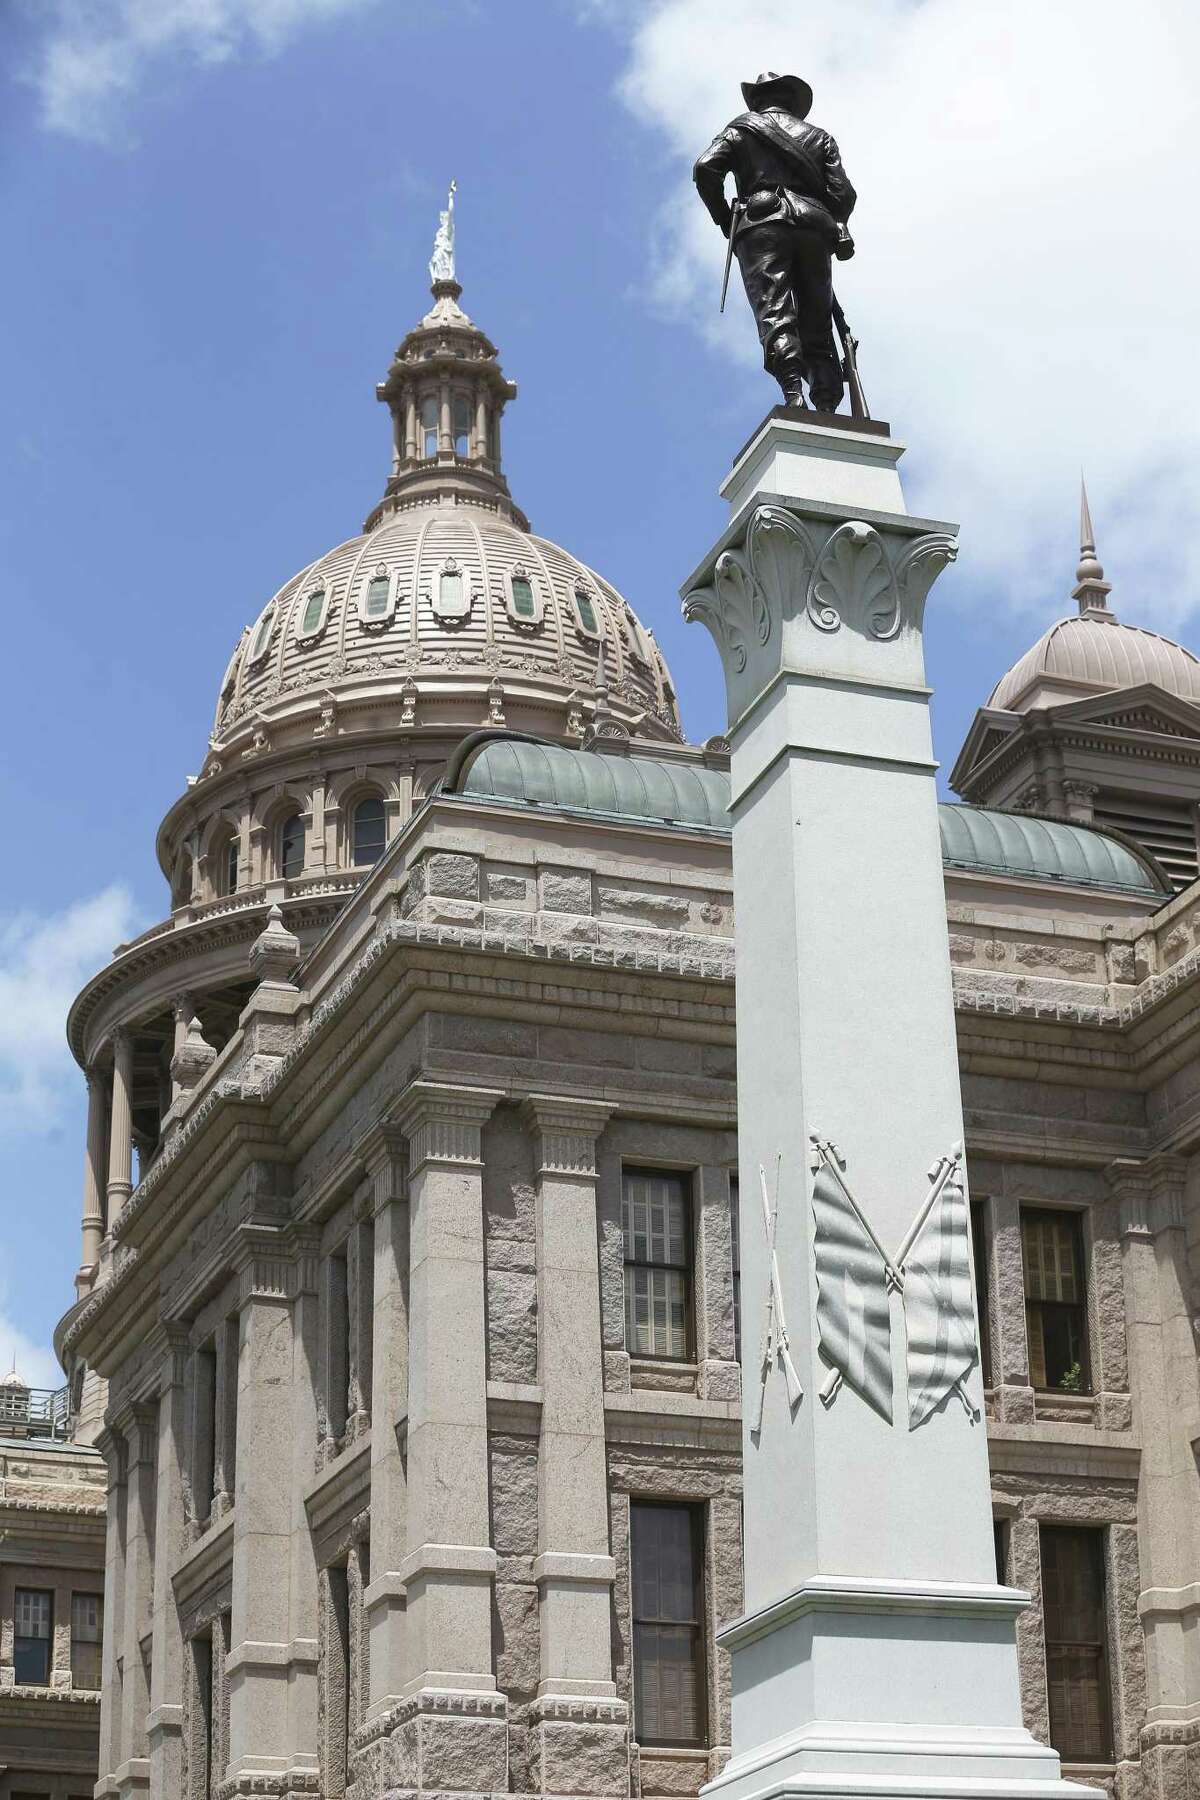 A depiction of Civil War flags adorns the side of the Texas Brigade monument on the east side of the State Capitol building in Austin on August 16, 2017.